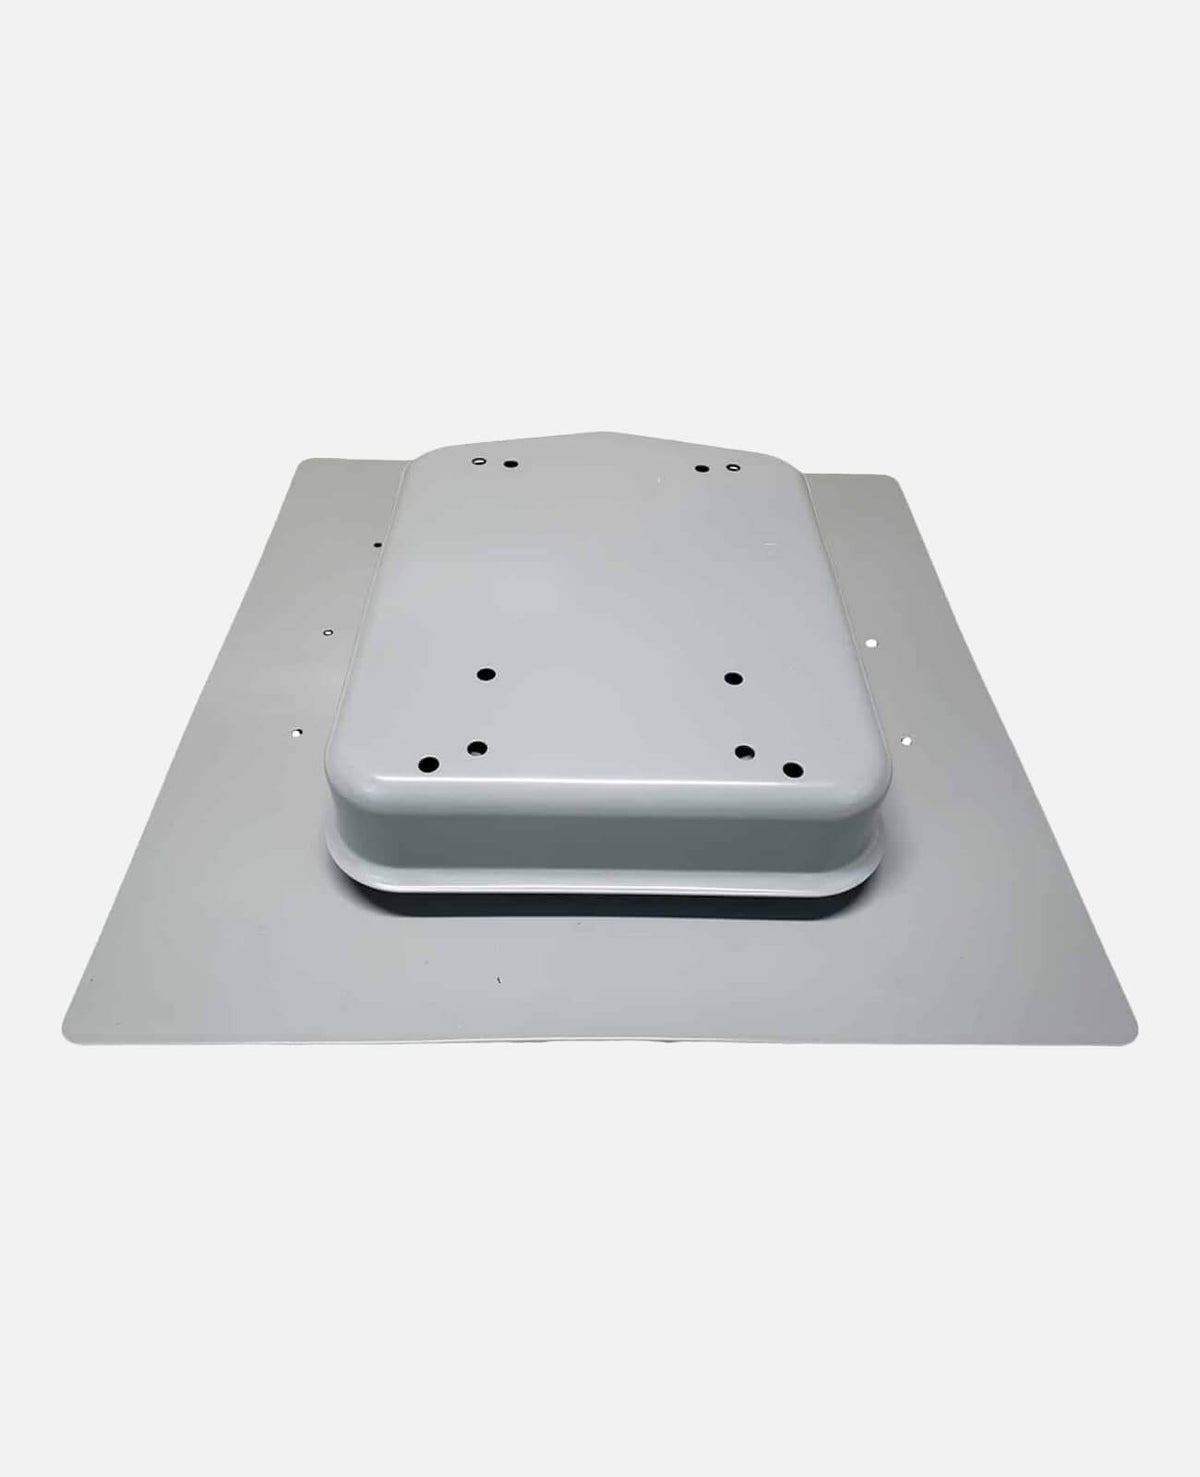 Commdeck Antenna Mounting System, Primer Grey (Model 0173 GRY)